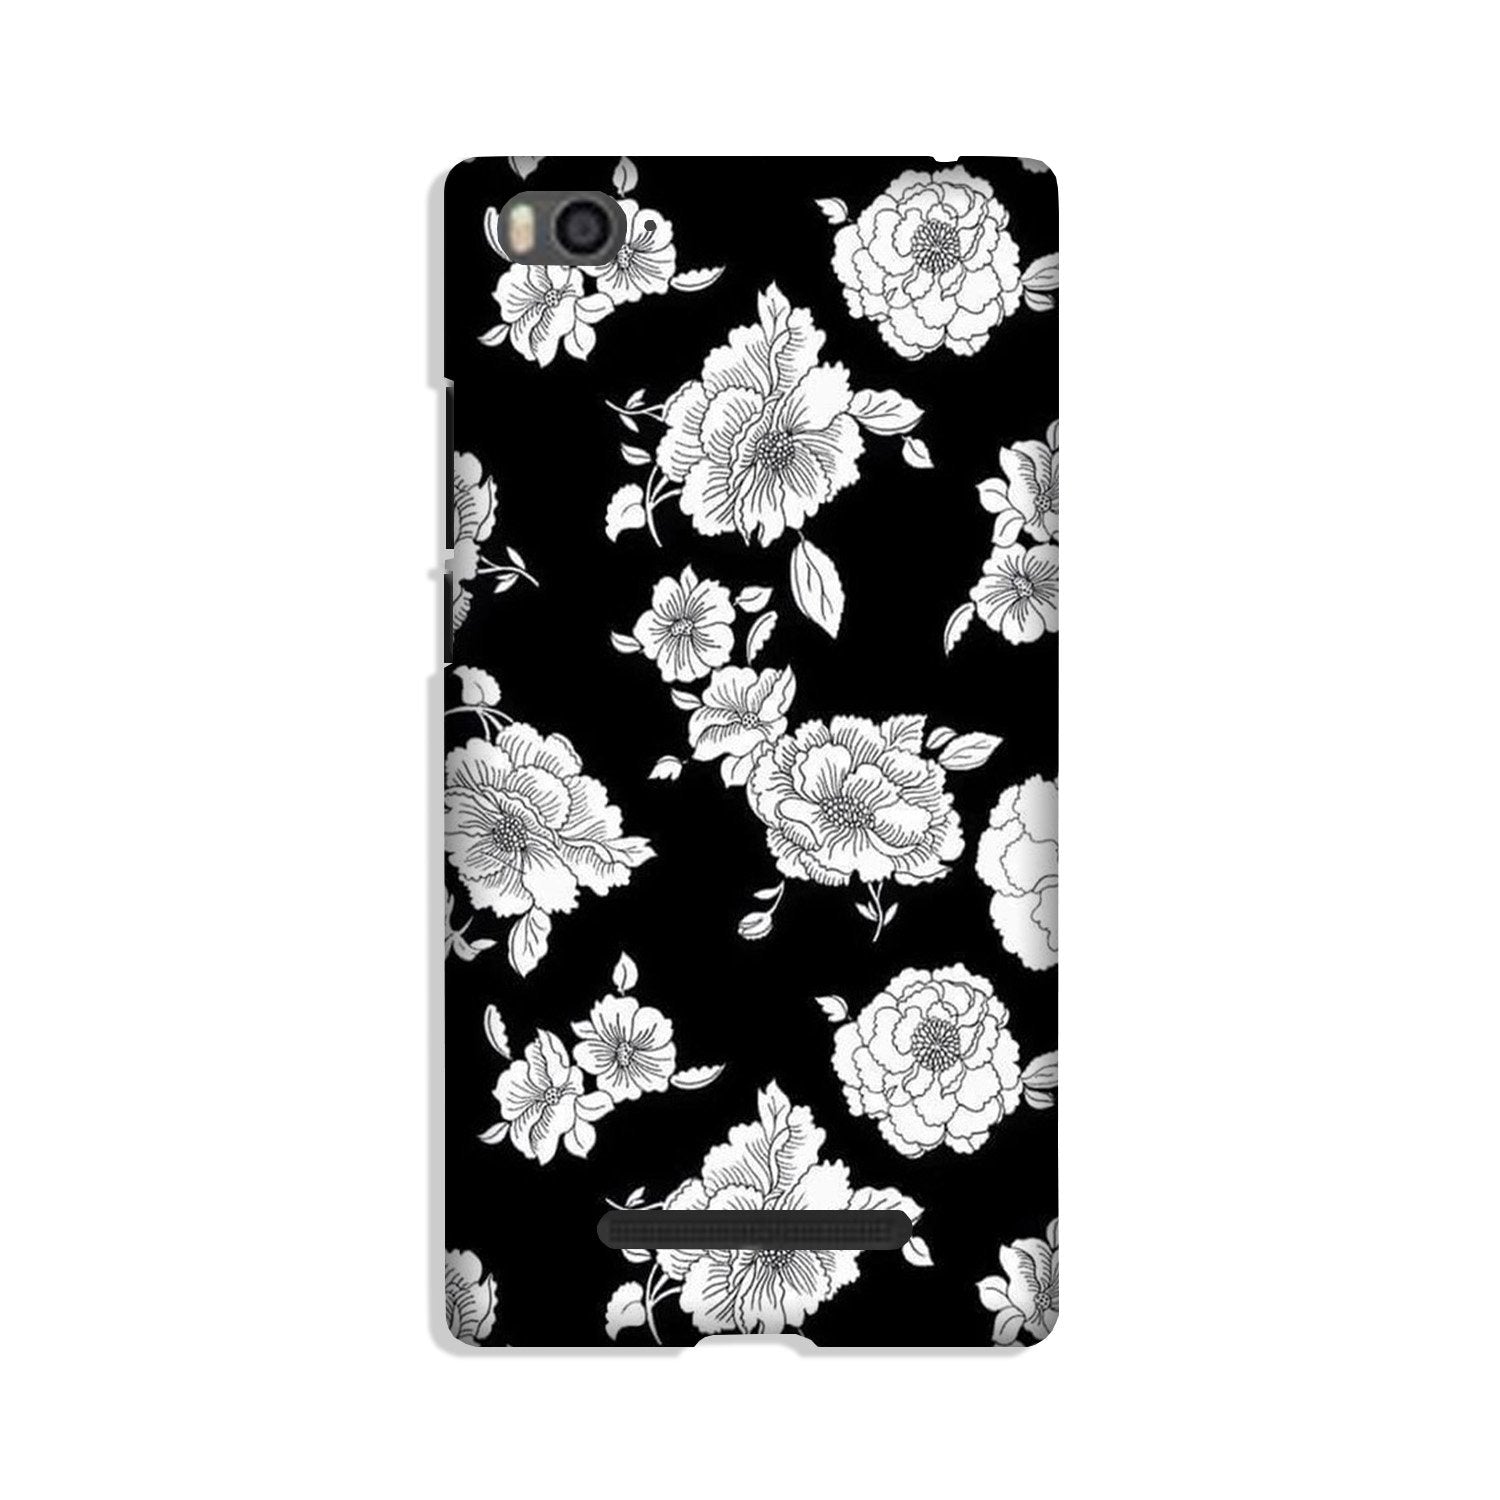 White flowers Black Background Case for Redmi 4A